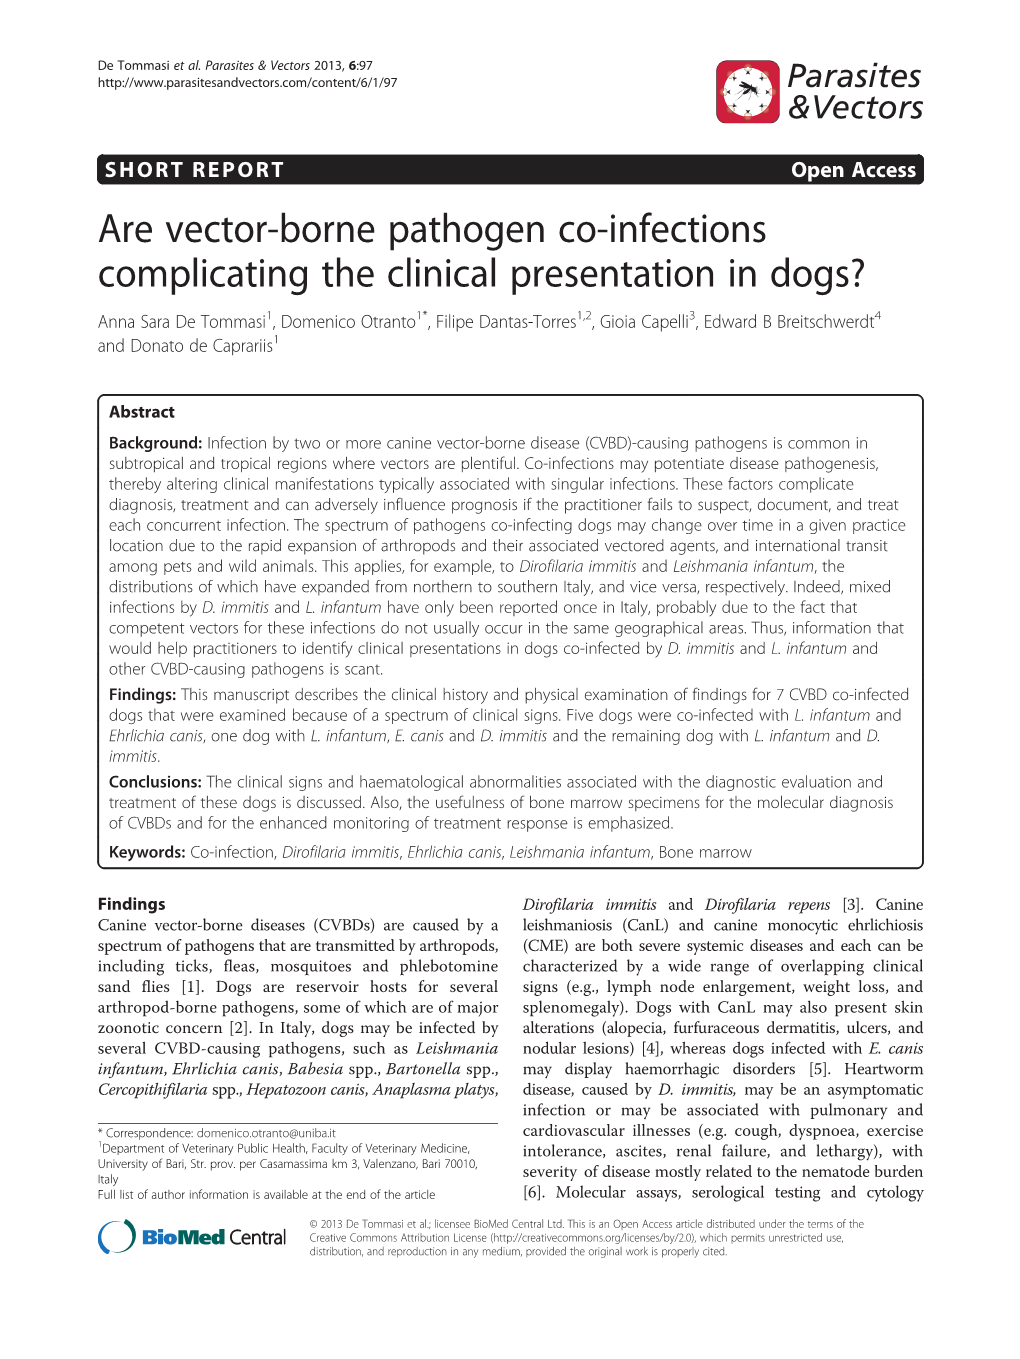 Are Vector-Borne Pathogen Co-Infections Complicating The